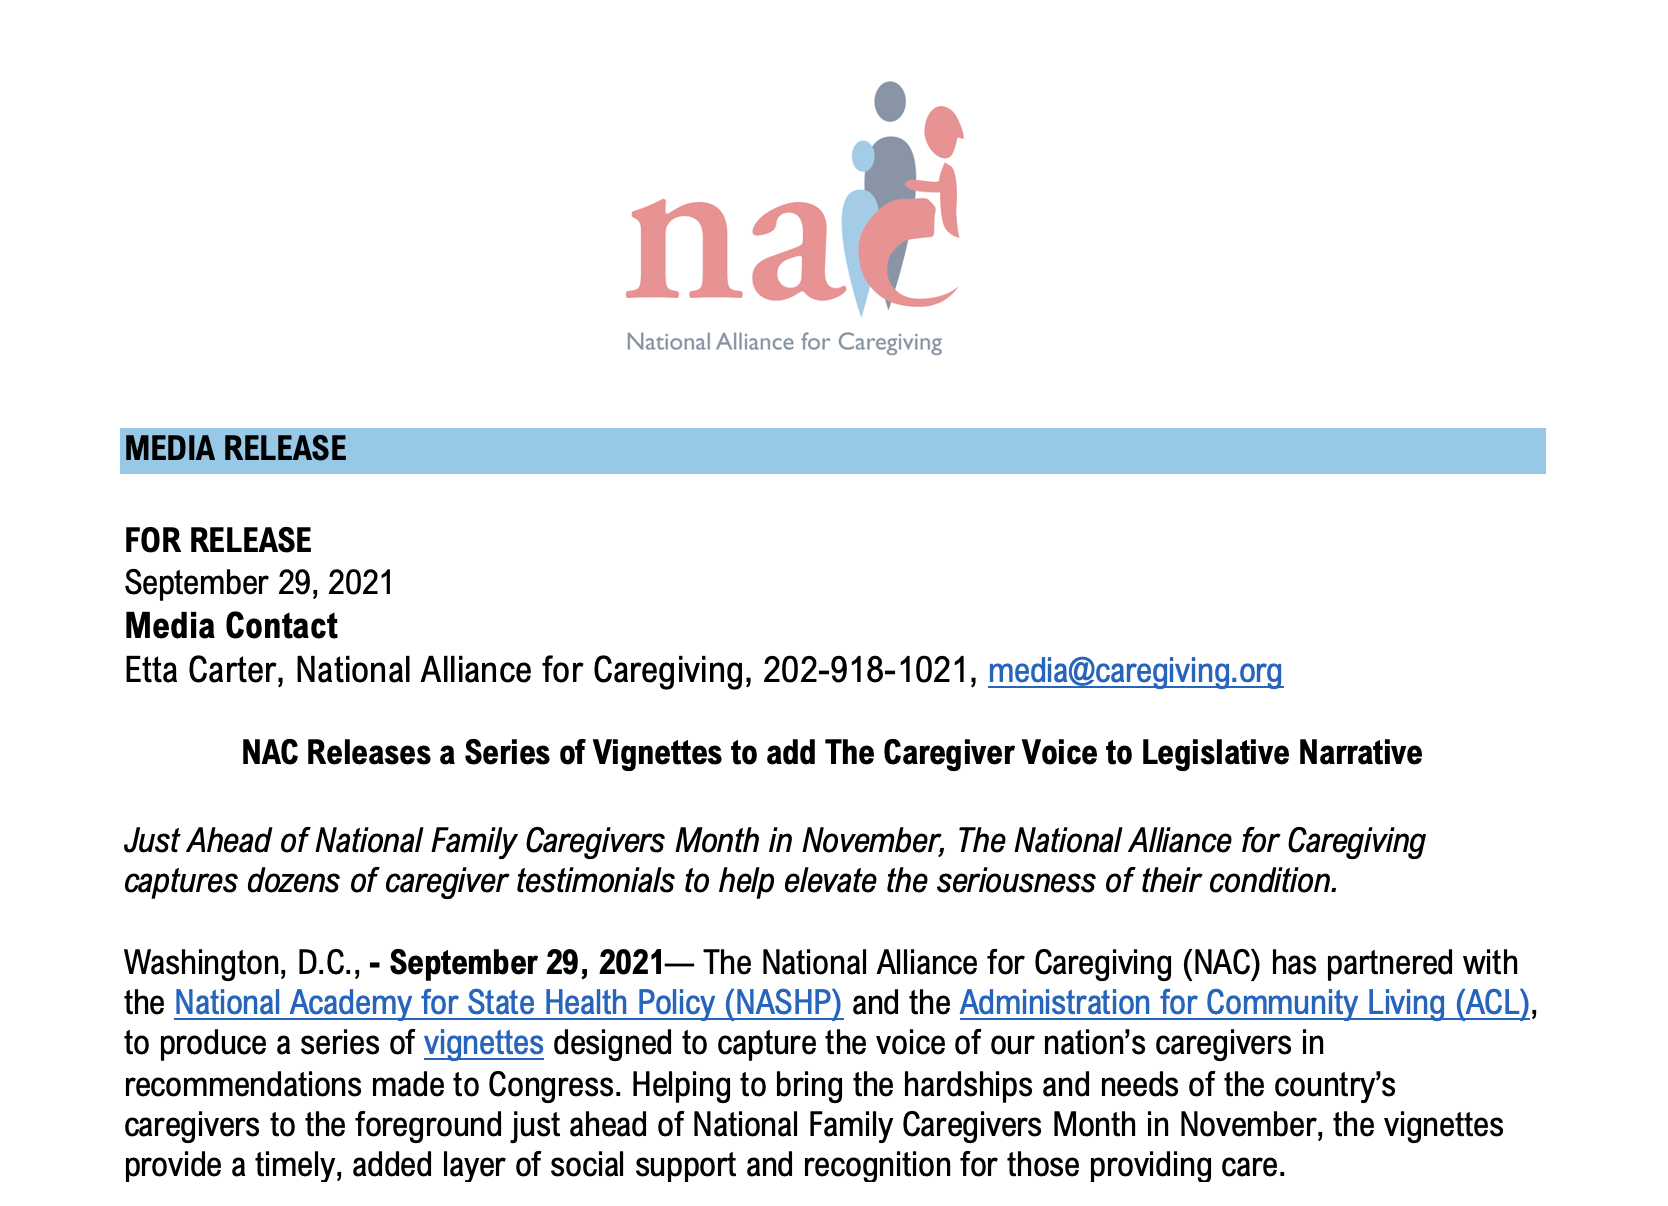 NAC Releases a Series of Vignettes to add The Caregiver Voice to Legislative Narrative